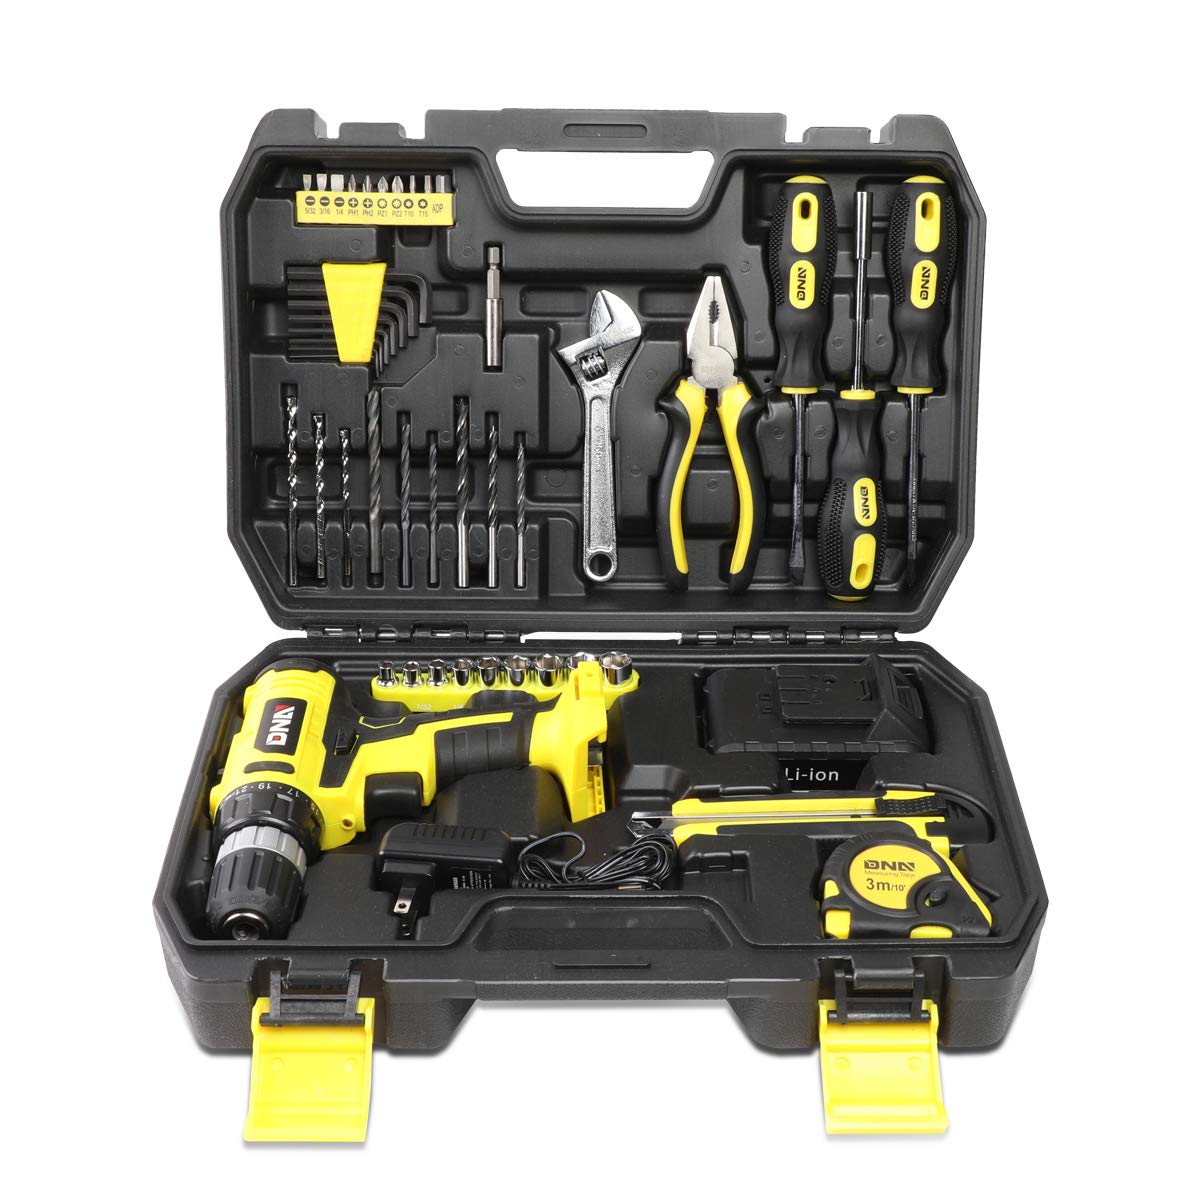 DNA MOTORING TOOLS-00019 Yellow 46 PCs 18V Cordless Drill Driver Bit Set w/Charger+Screwdrivers+Pliers Home/Offic Repair Kit